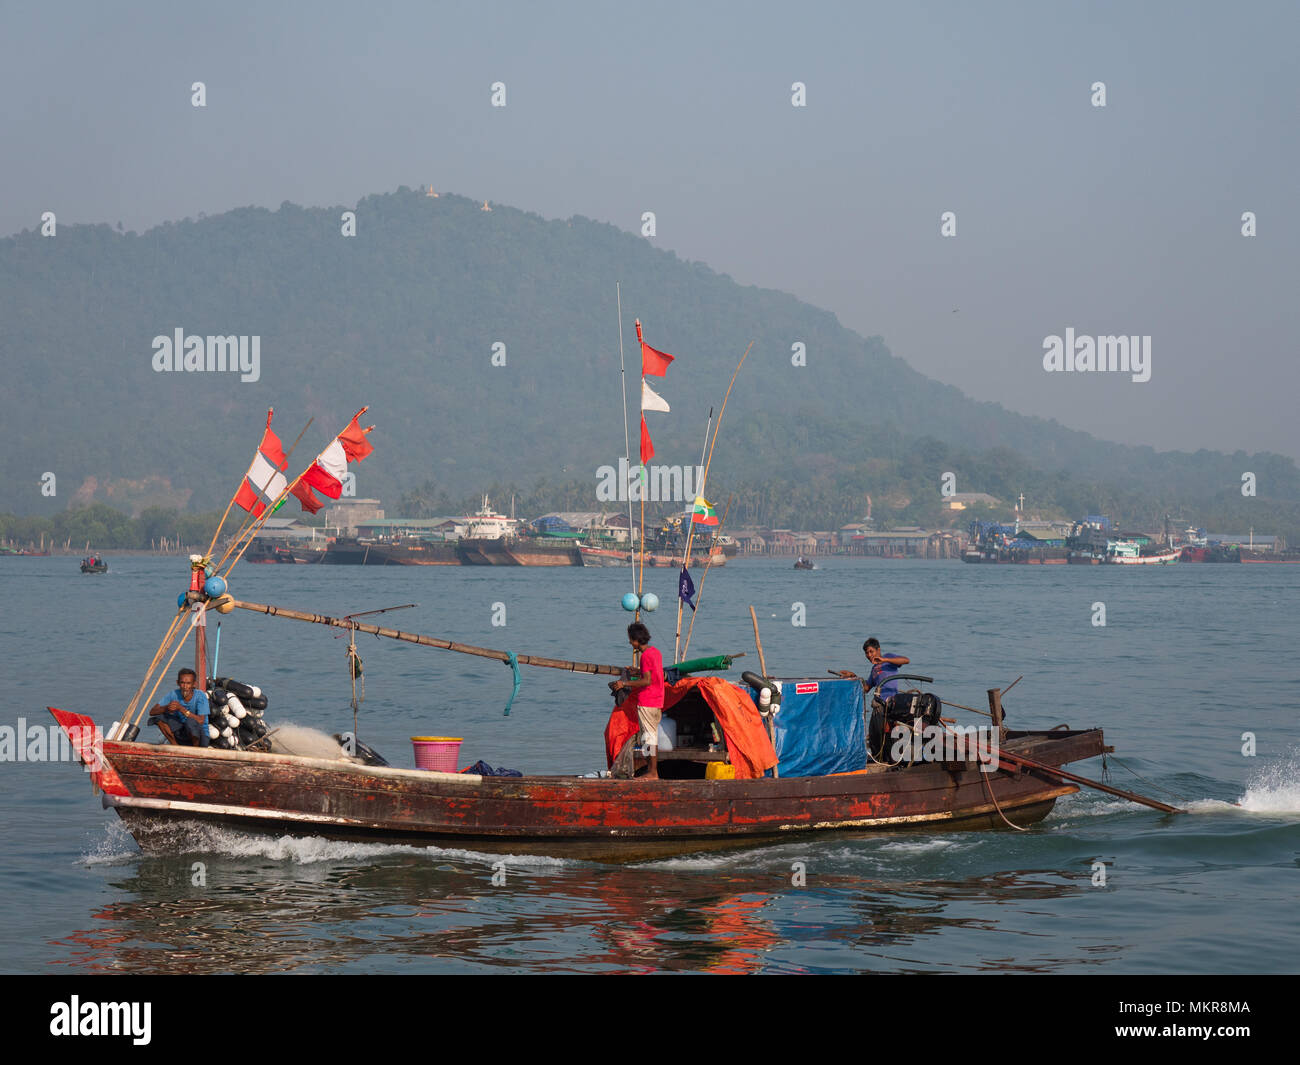 Fishing vessels in Myeik, formerly Mergui, the largest city in the Tanintharyi Region of Myanmar. Pataw Island in the background. Stock Photo